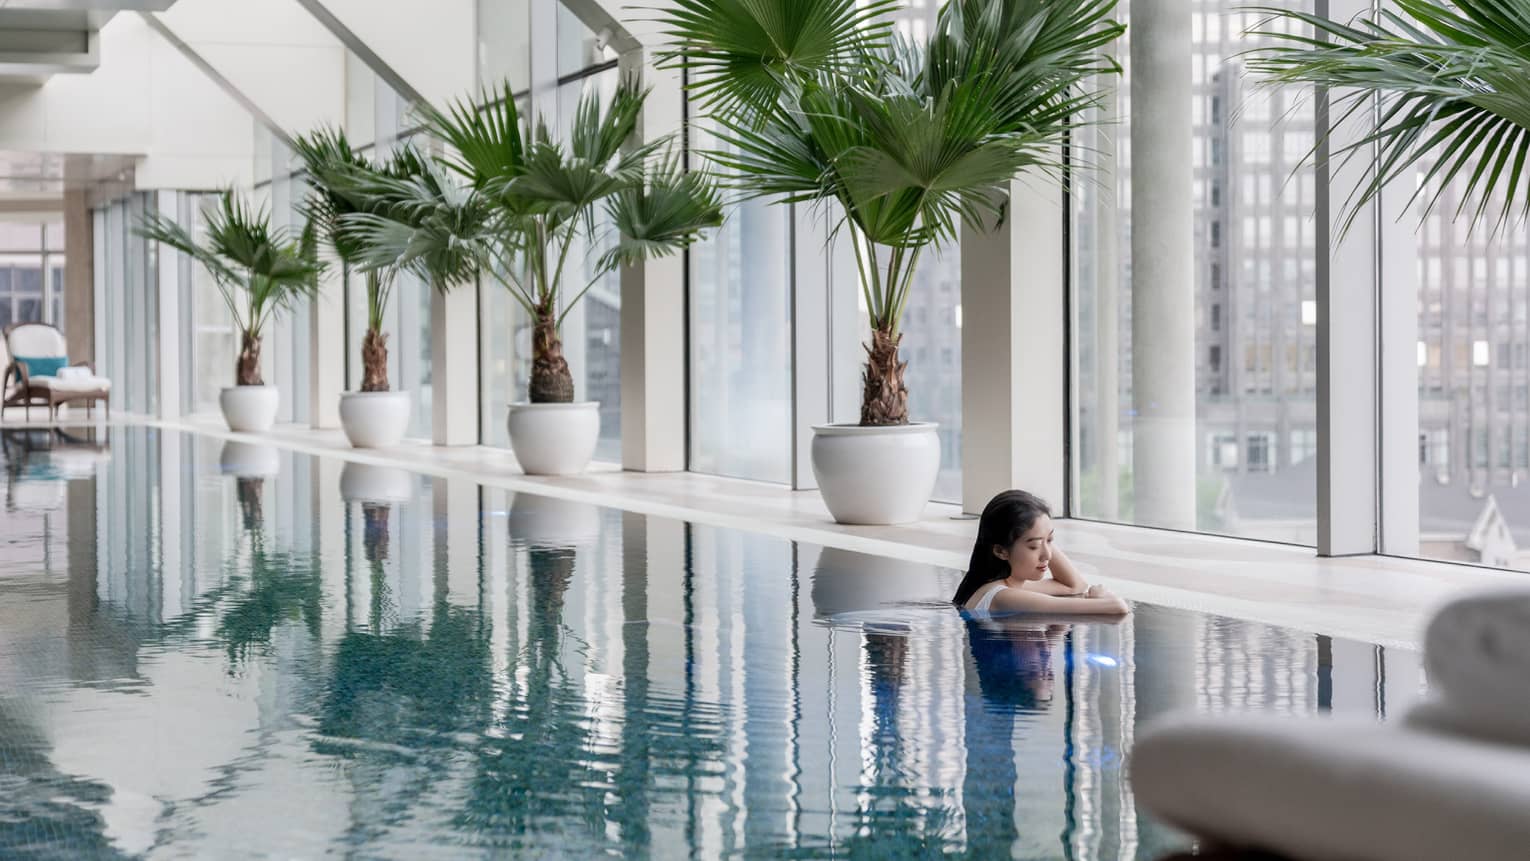 Female guest in sparkling pool surrounded by potted palms and floor-to-ceiling windows